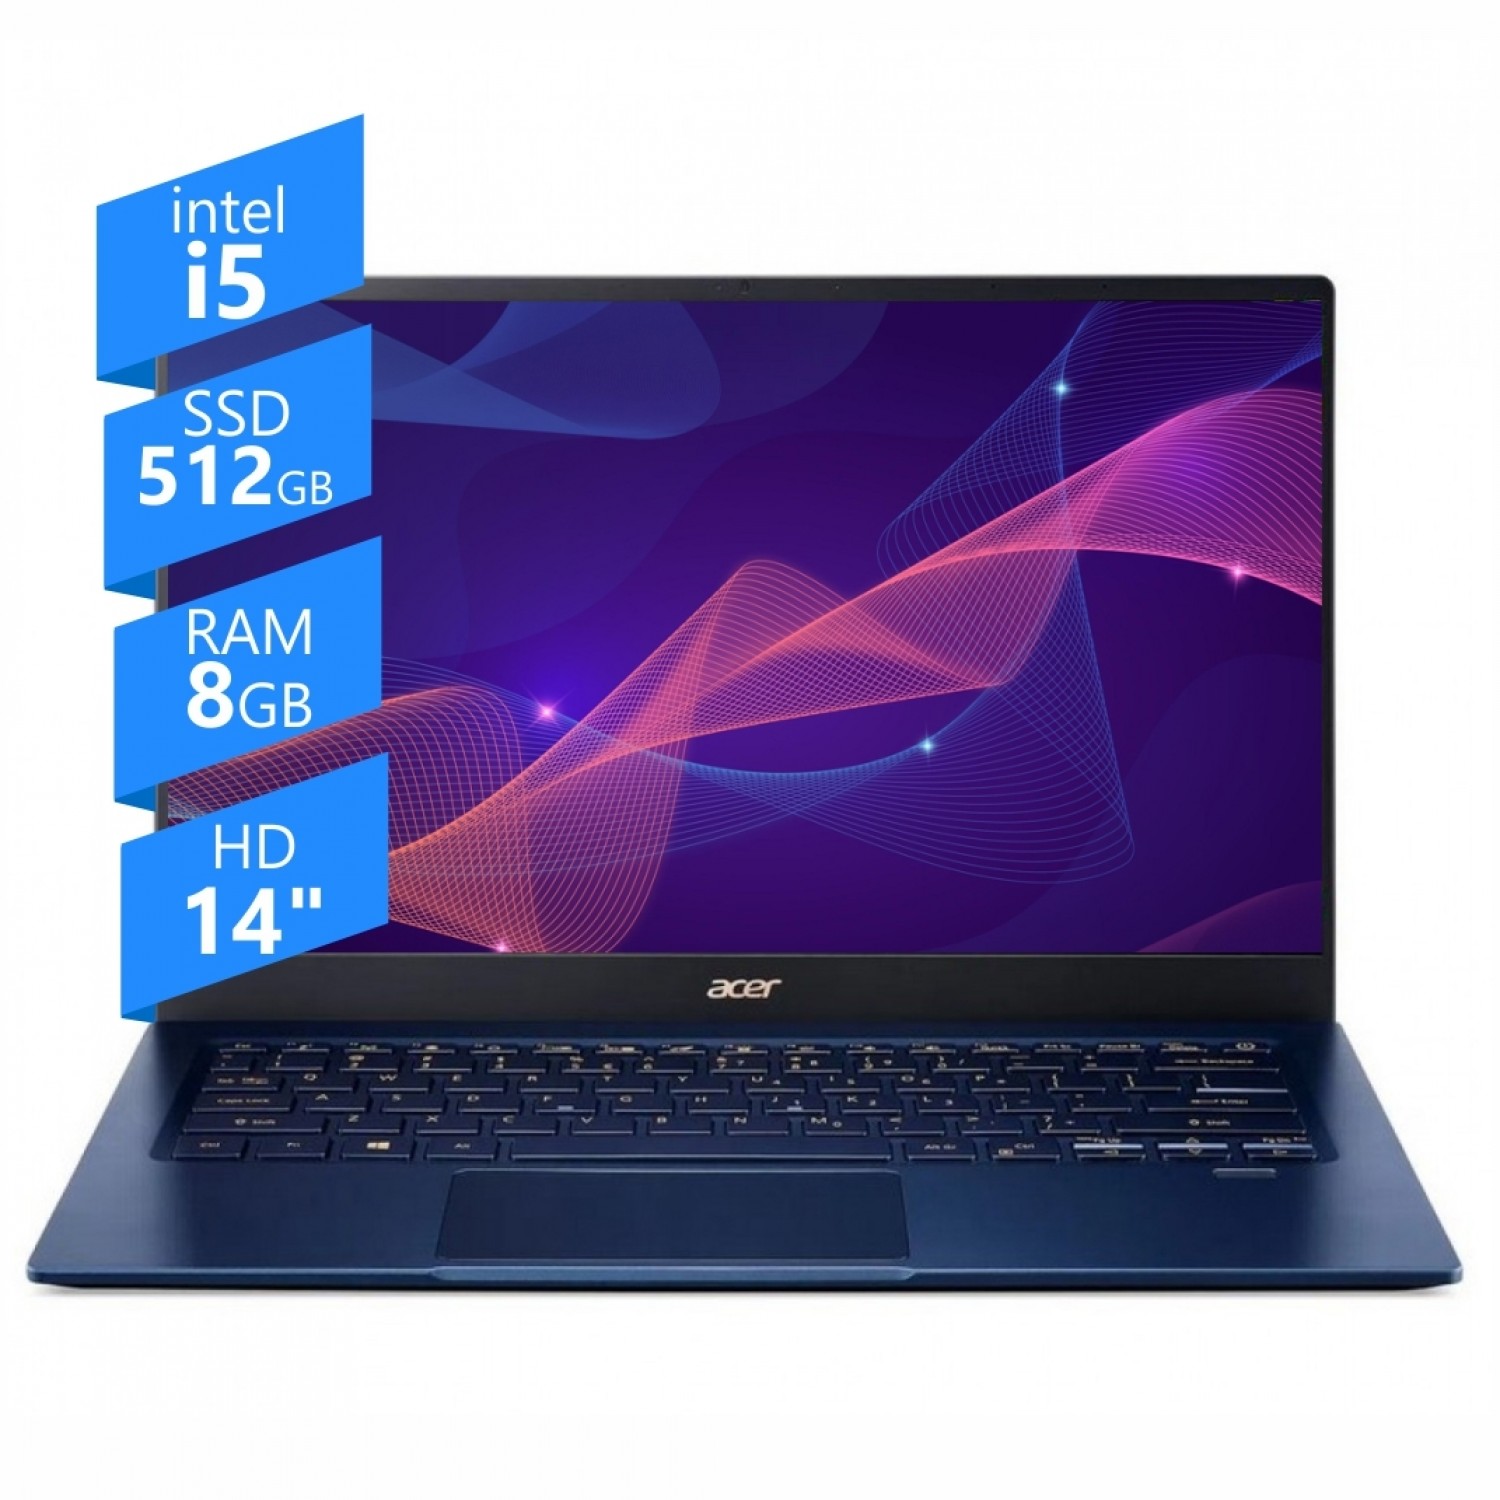 ACER NOTEBOOK SWIFT 5 C I5 1135 G7 8 GB 512 SSD 14 W10H GOLD